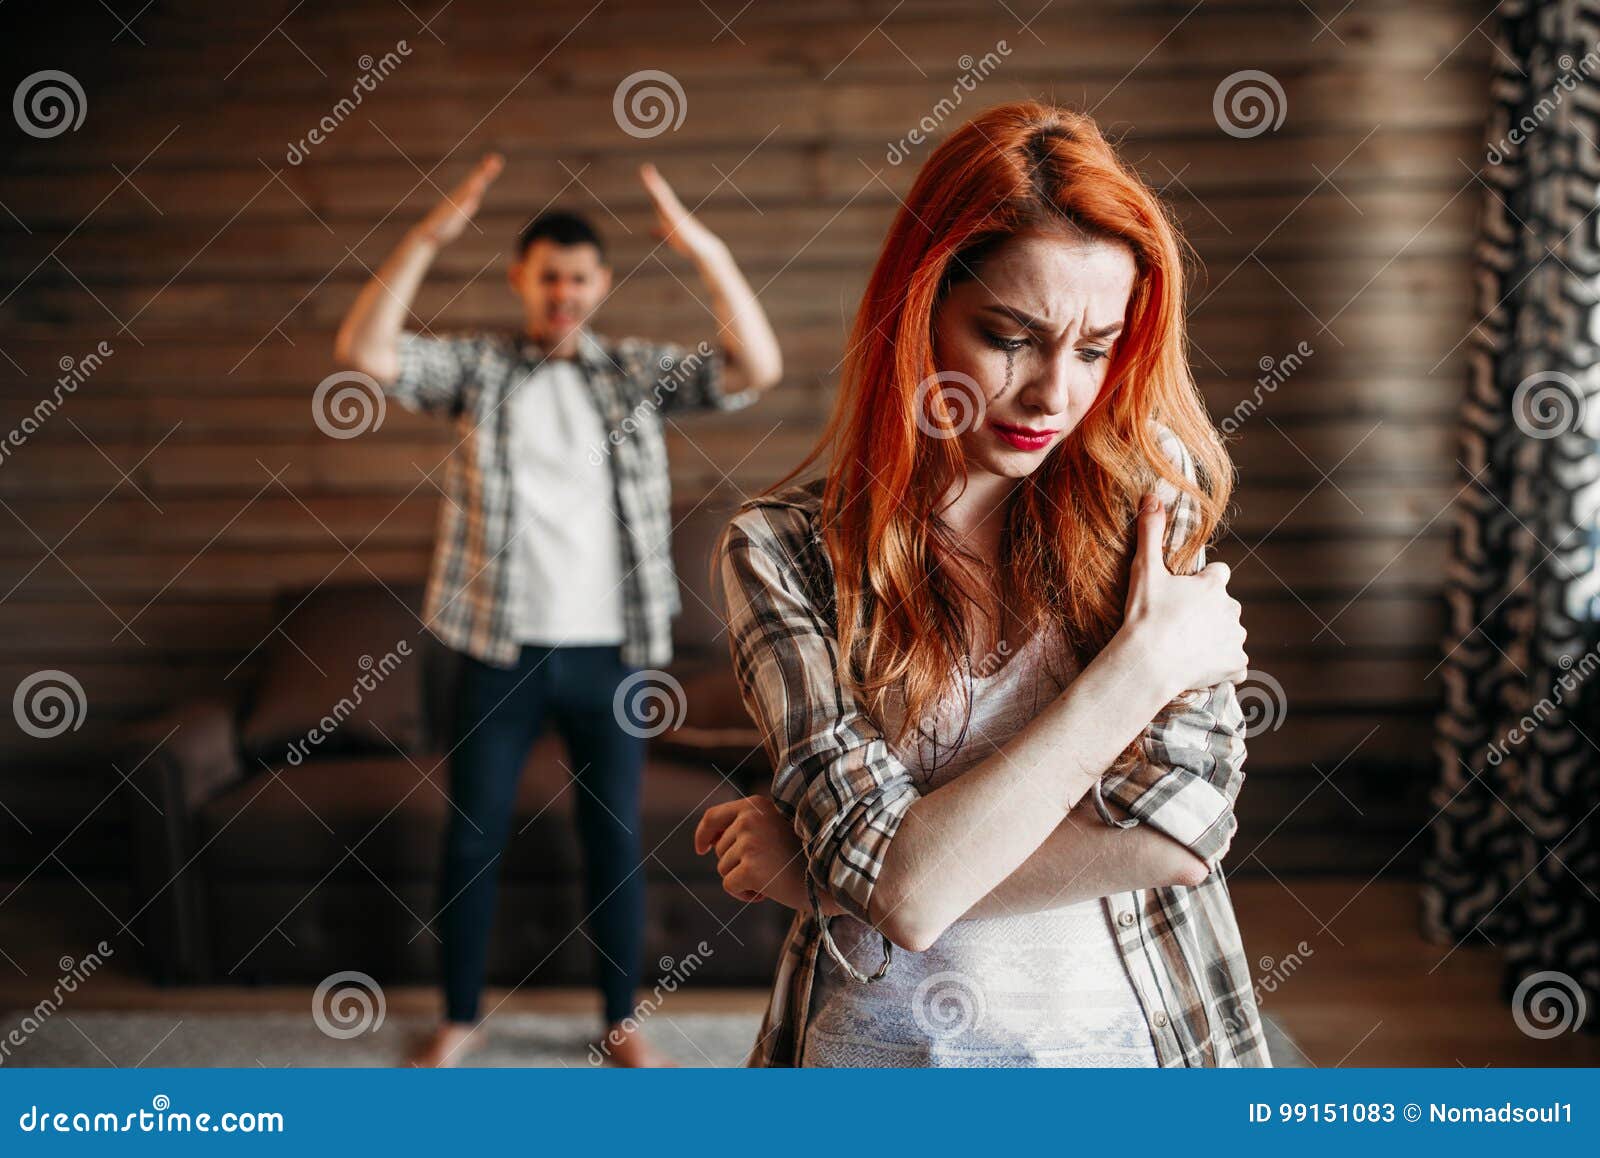 Family Quarrel, Couple in Conflict, Woman Crying Stock Image - Image of ...